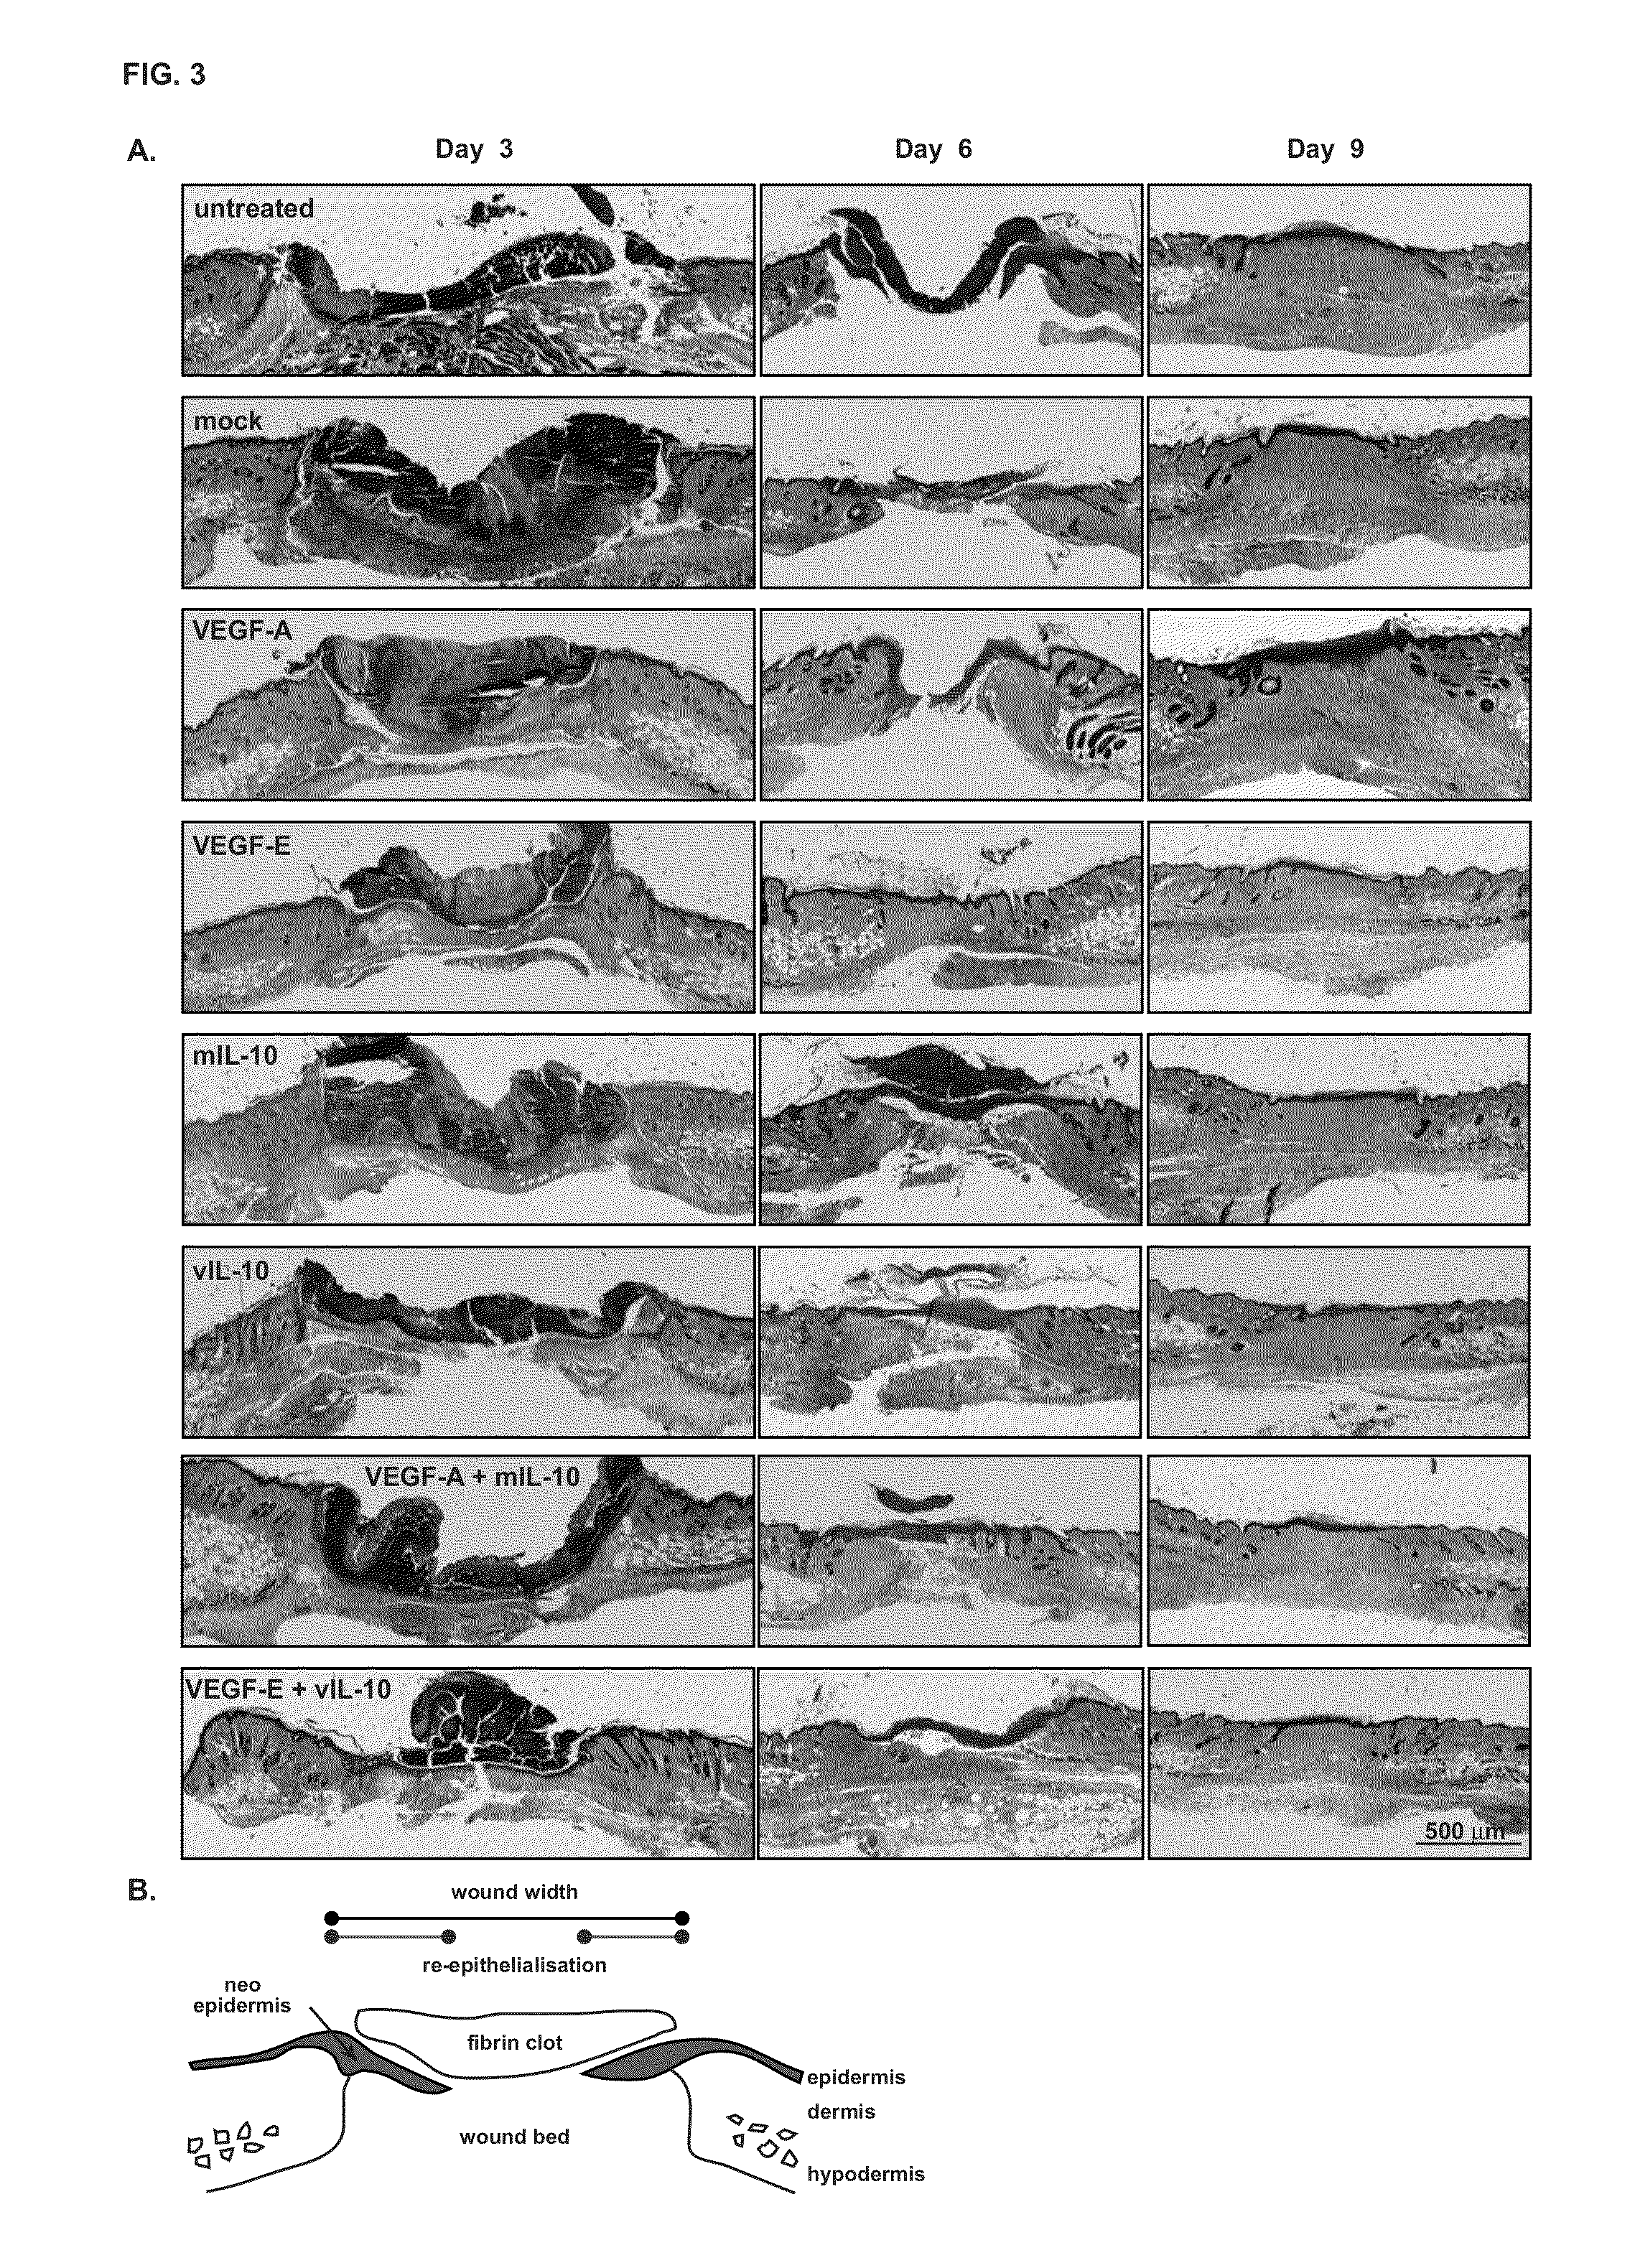 Combination Treatments and Compositions for Wound Healing